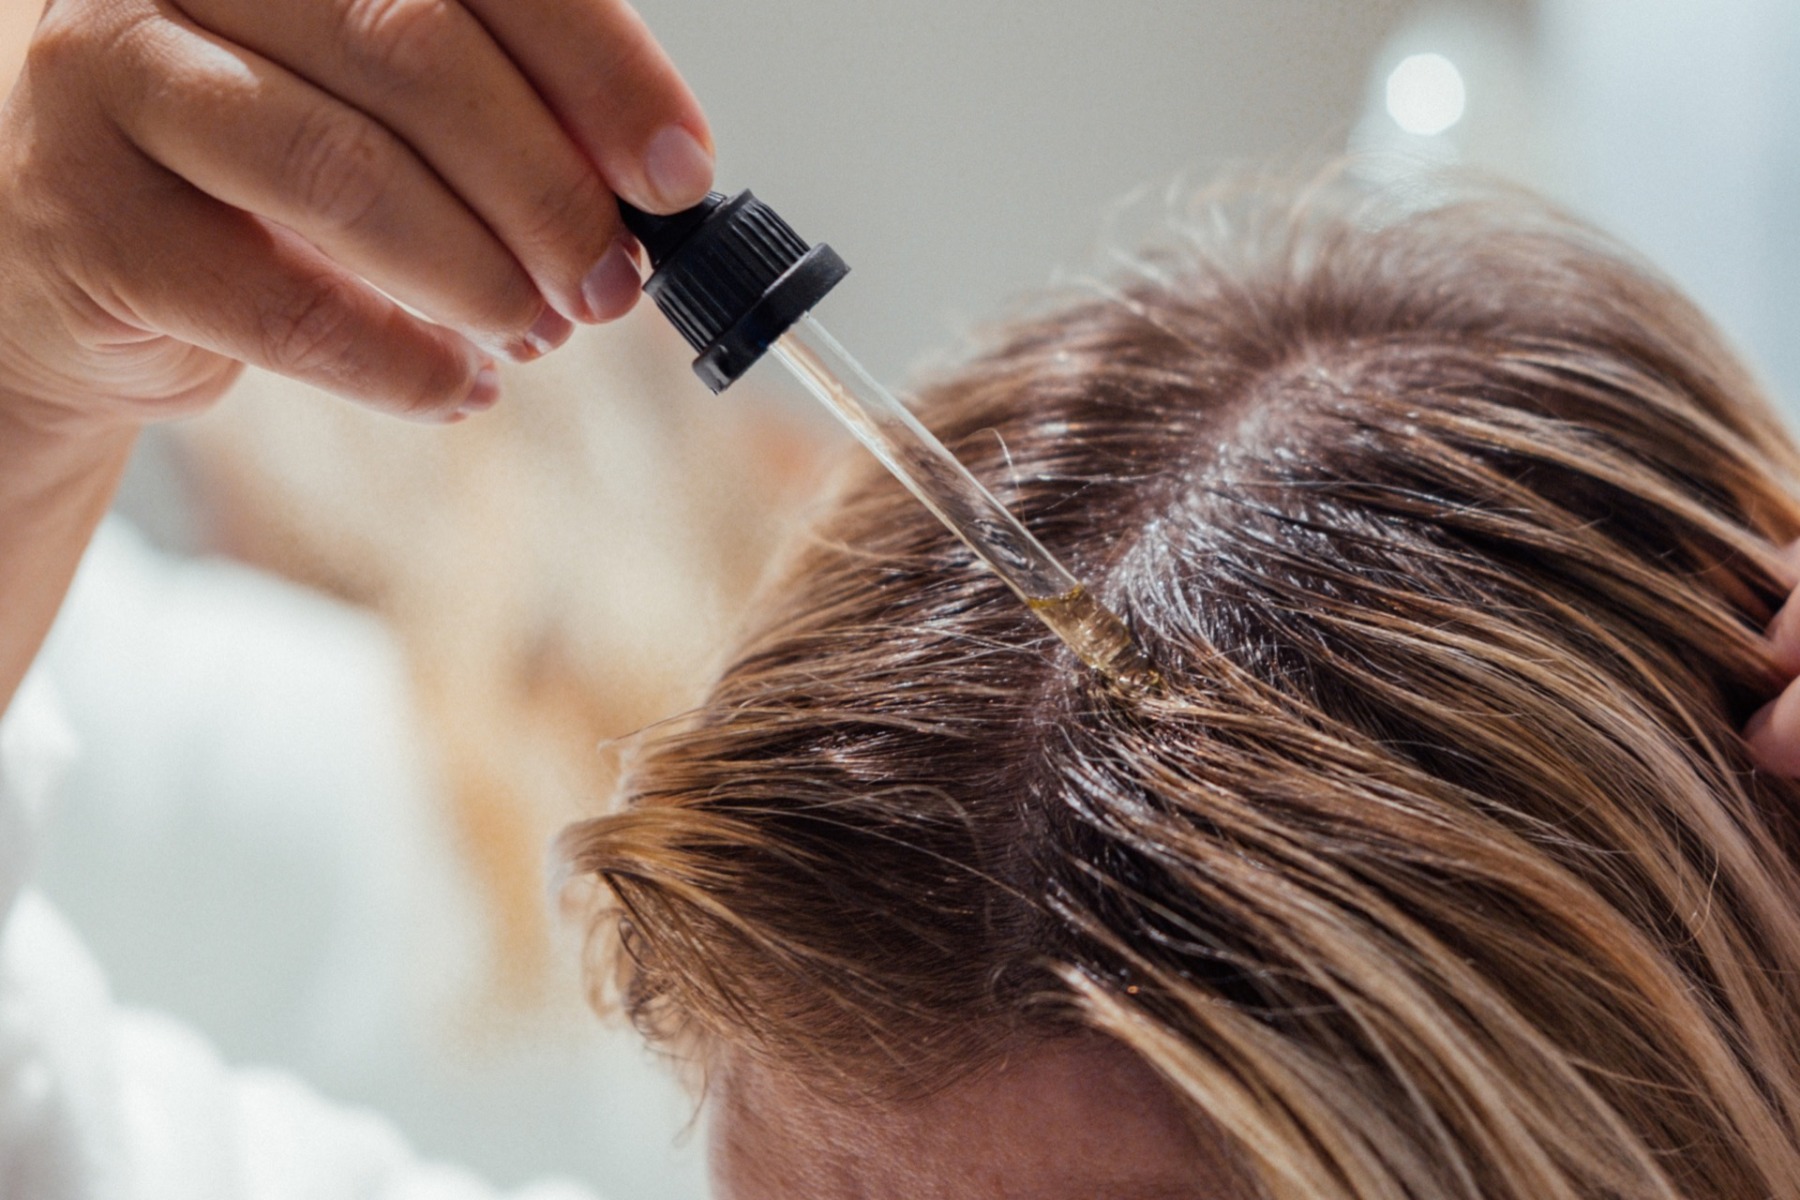 female pattern hair loss patient applying Minoxidil to her hair